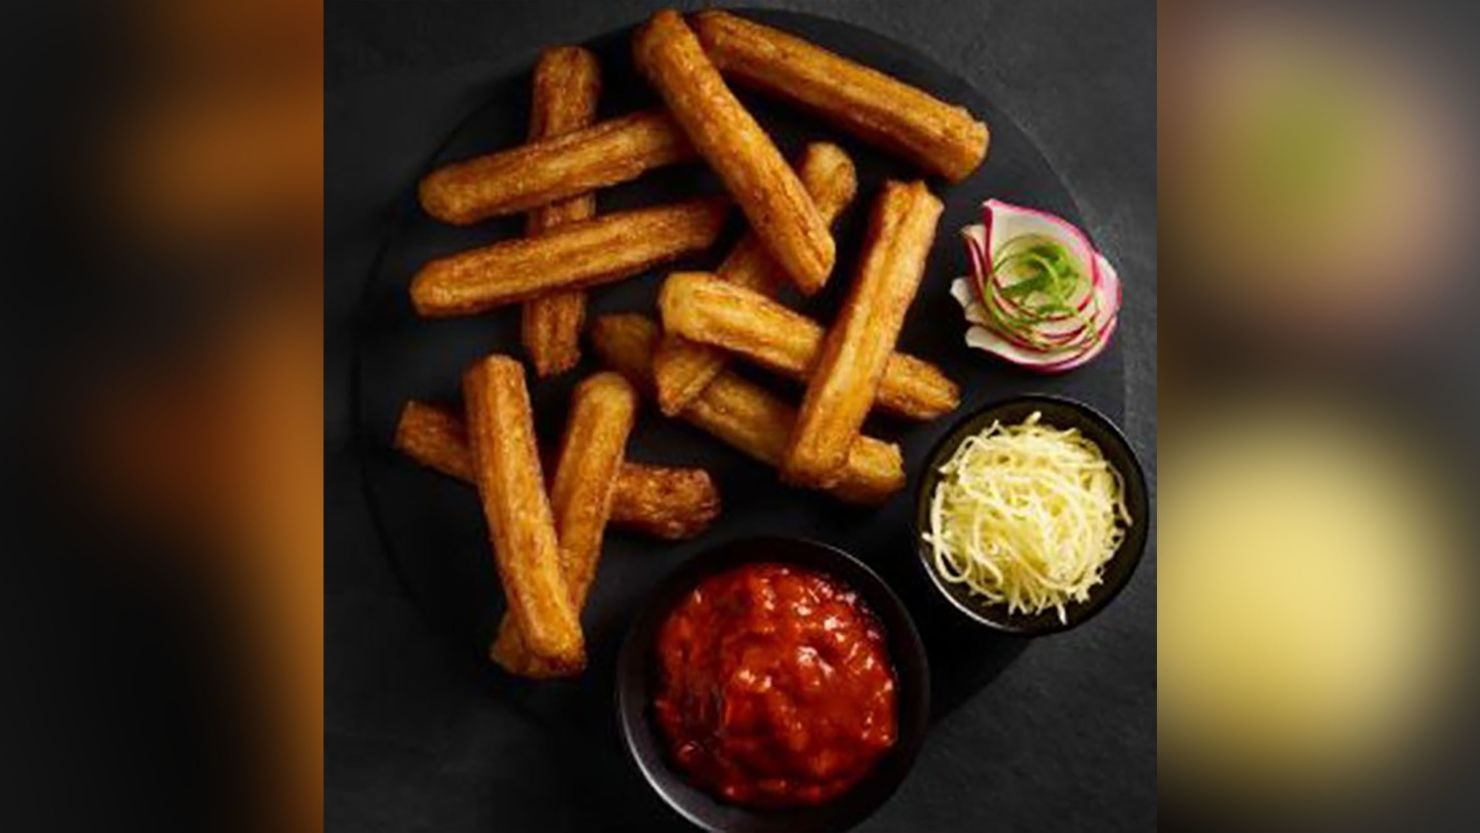 The cheese-filled churros are part of Morrisons' Christmas food range.